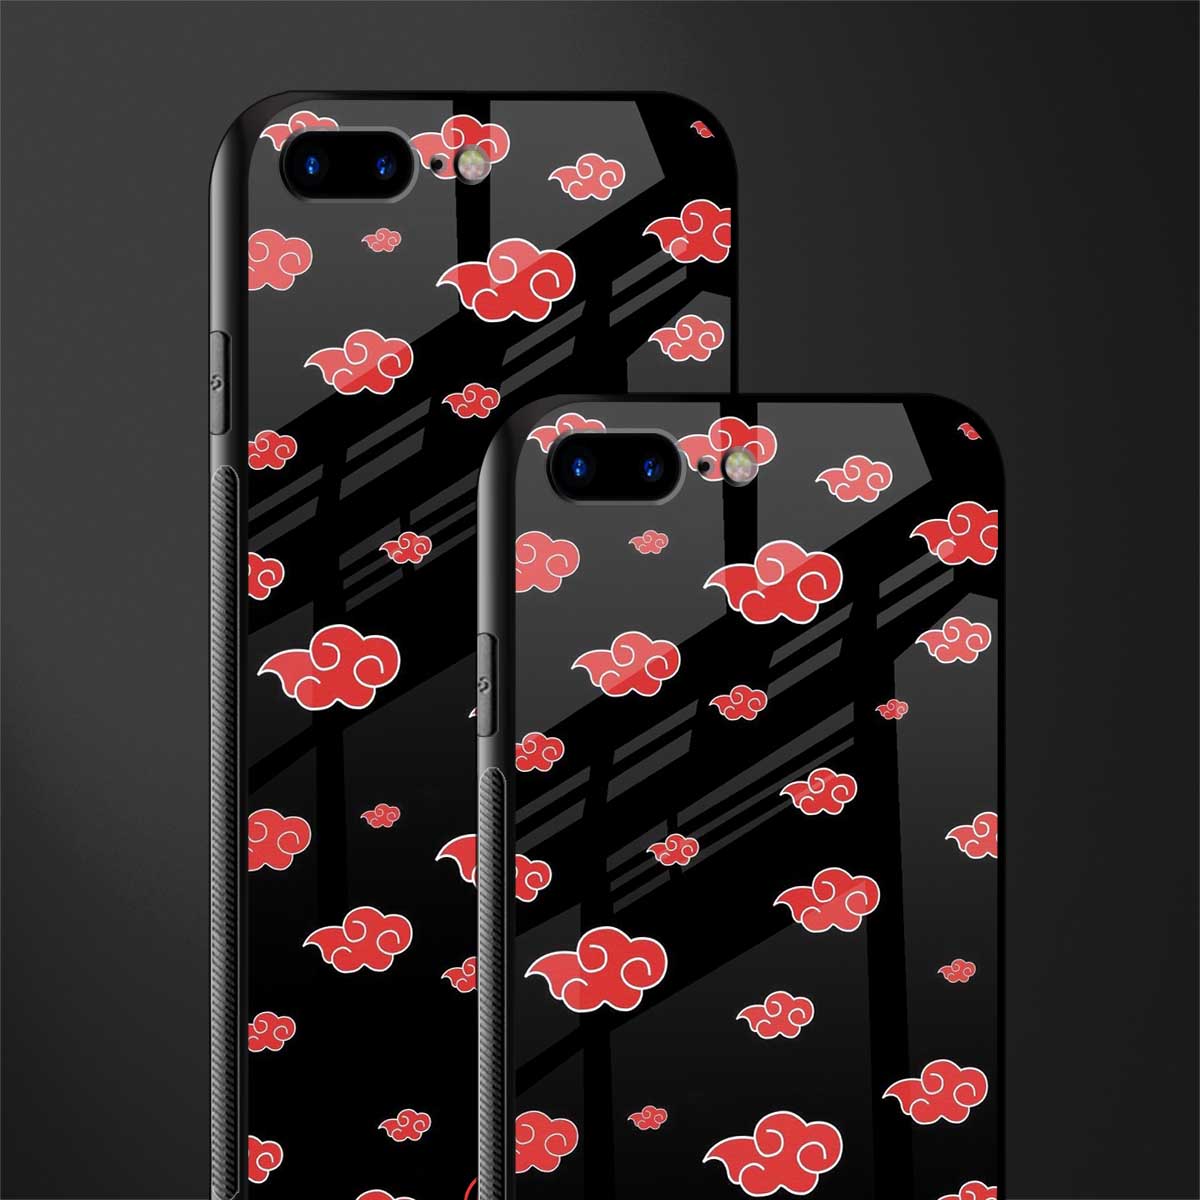 IPhone 7/8 Anime Cases | Design By Humans